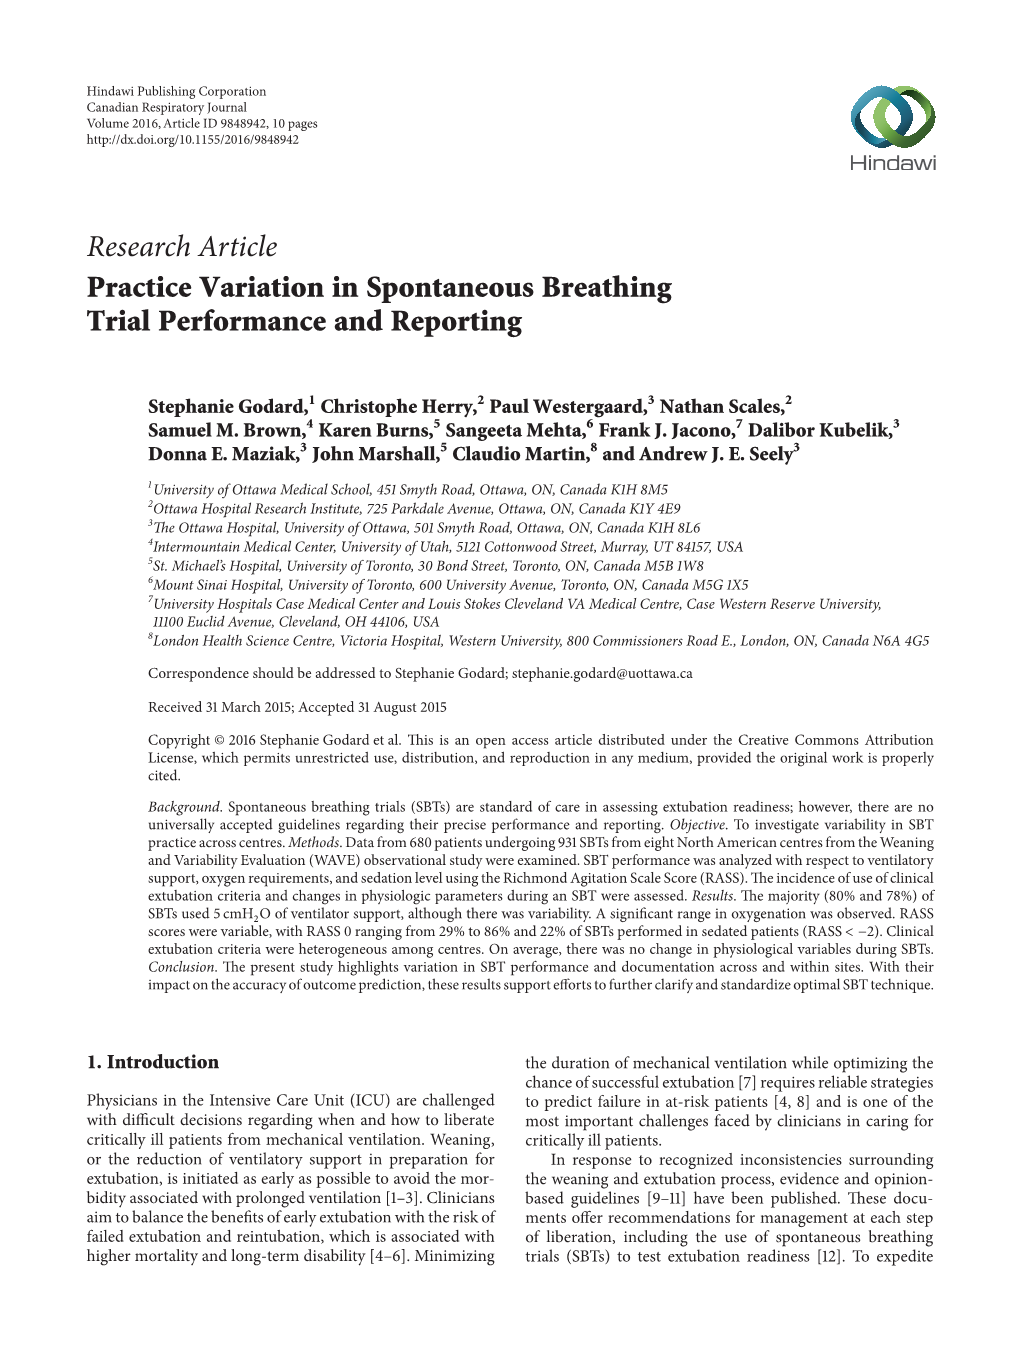 Research Article Practice Variation in Spontaneous Breathing Trial Performance and Reporting